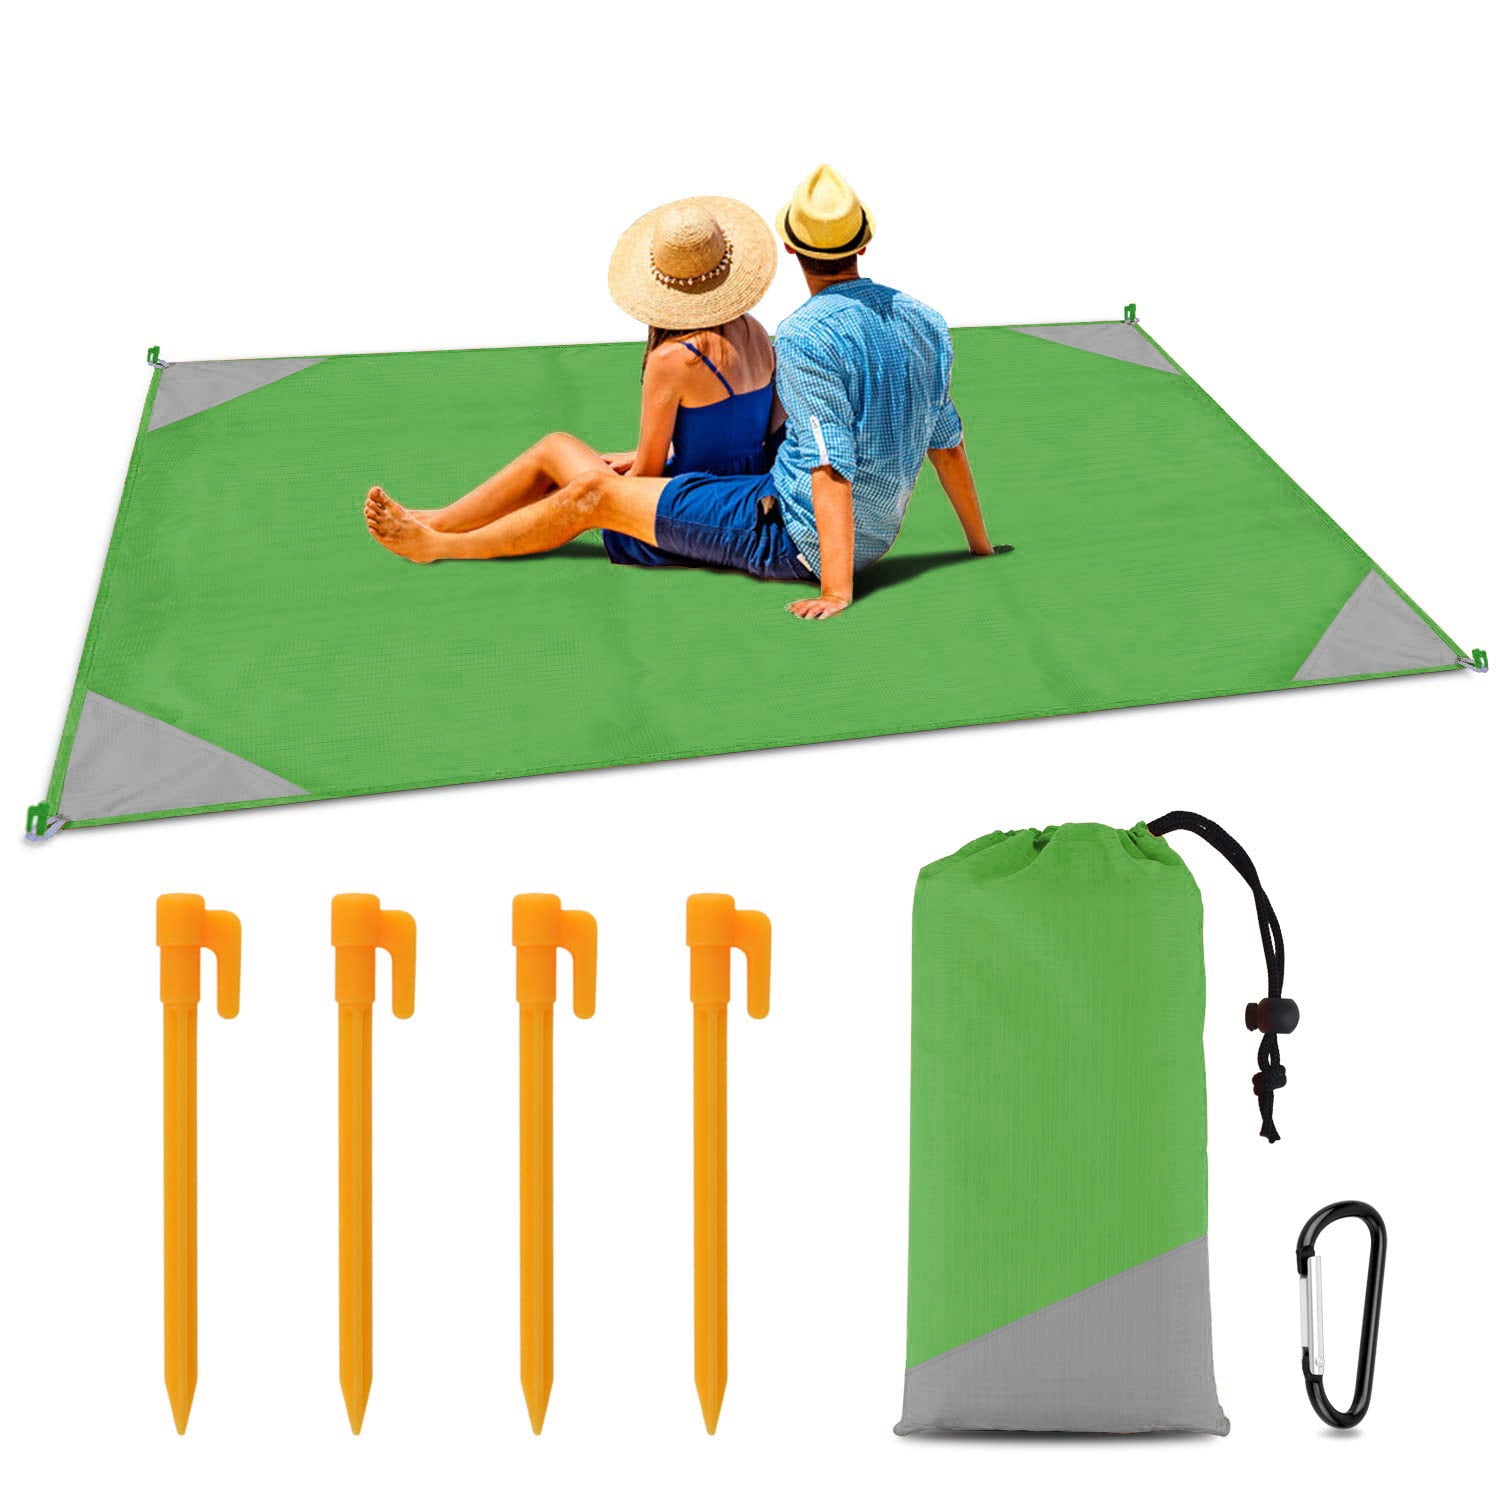 Voicrown Sand Proof Beach Mat for 4 Adults Picnic Blanket Hiking with 4 Metal Pile & 4 Corner Pockets Lightweight Camping Compact Sandfree Magic Sheets Quick Drying Durable for Travel 